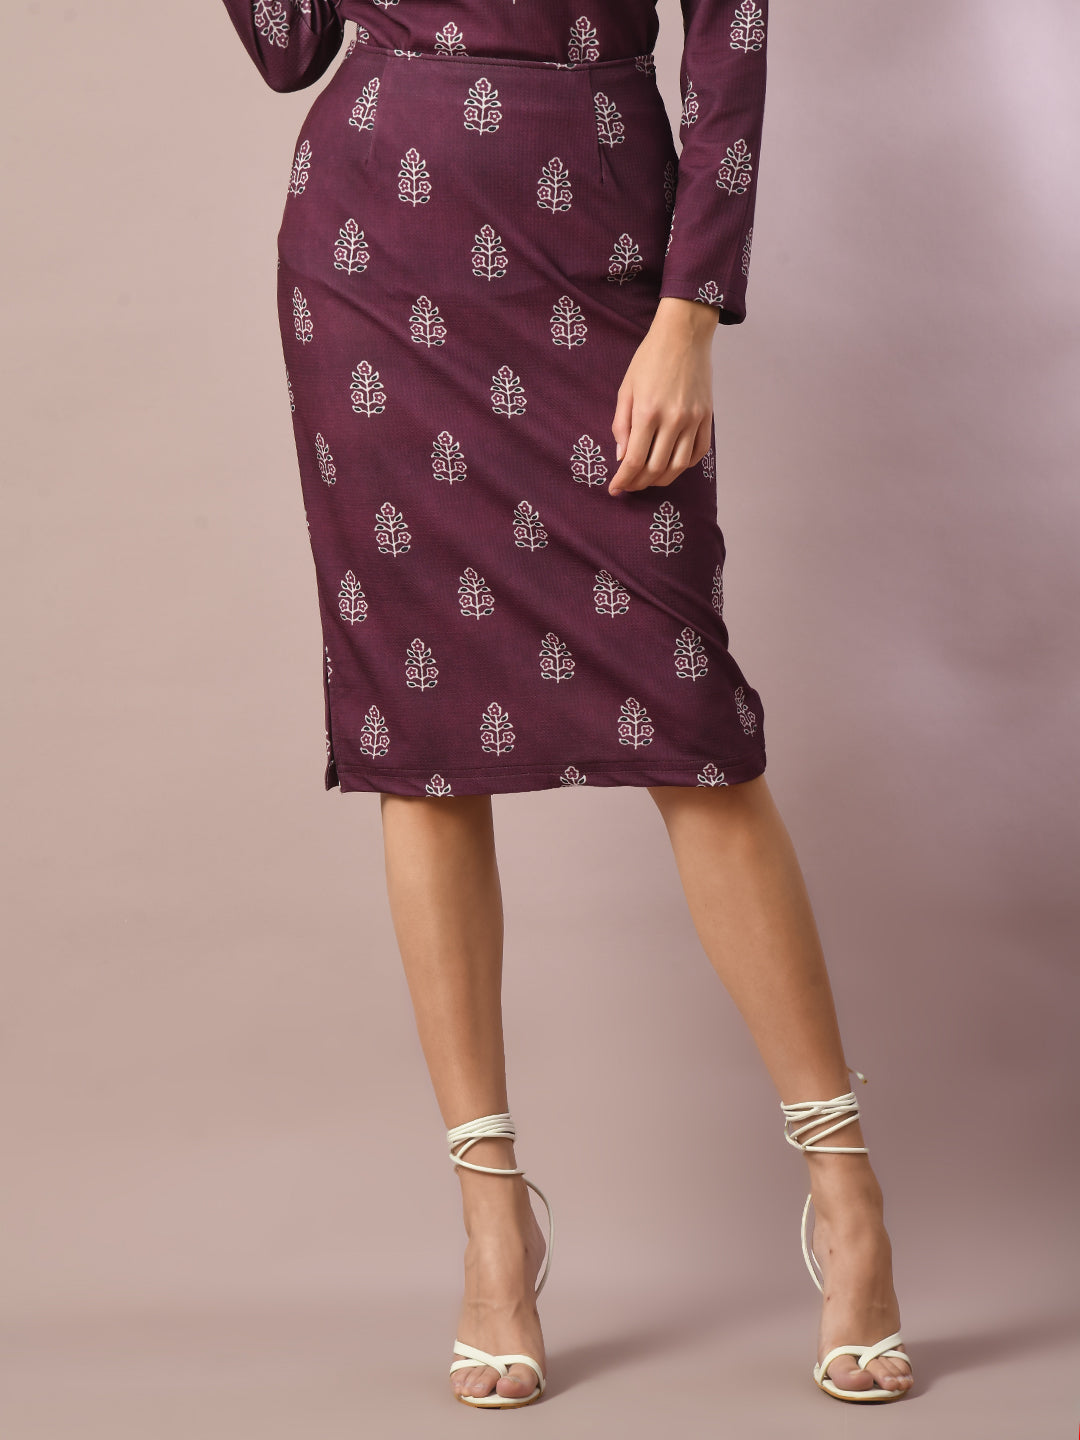 Women's  Magenta Printed Round Neck Party Top With Skirt Co-Ord Set  - Myshka